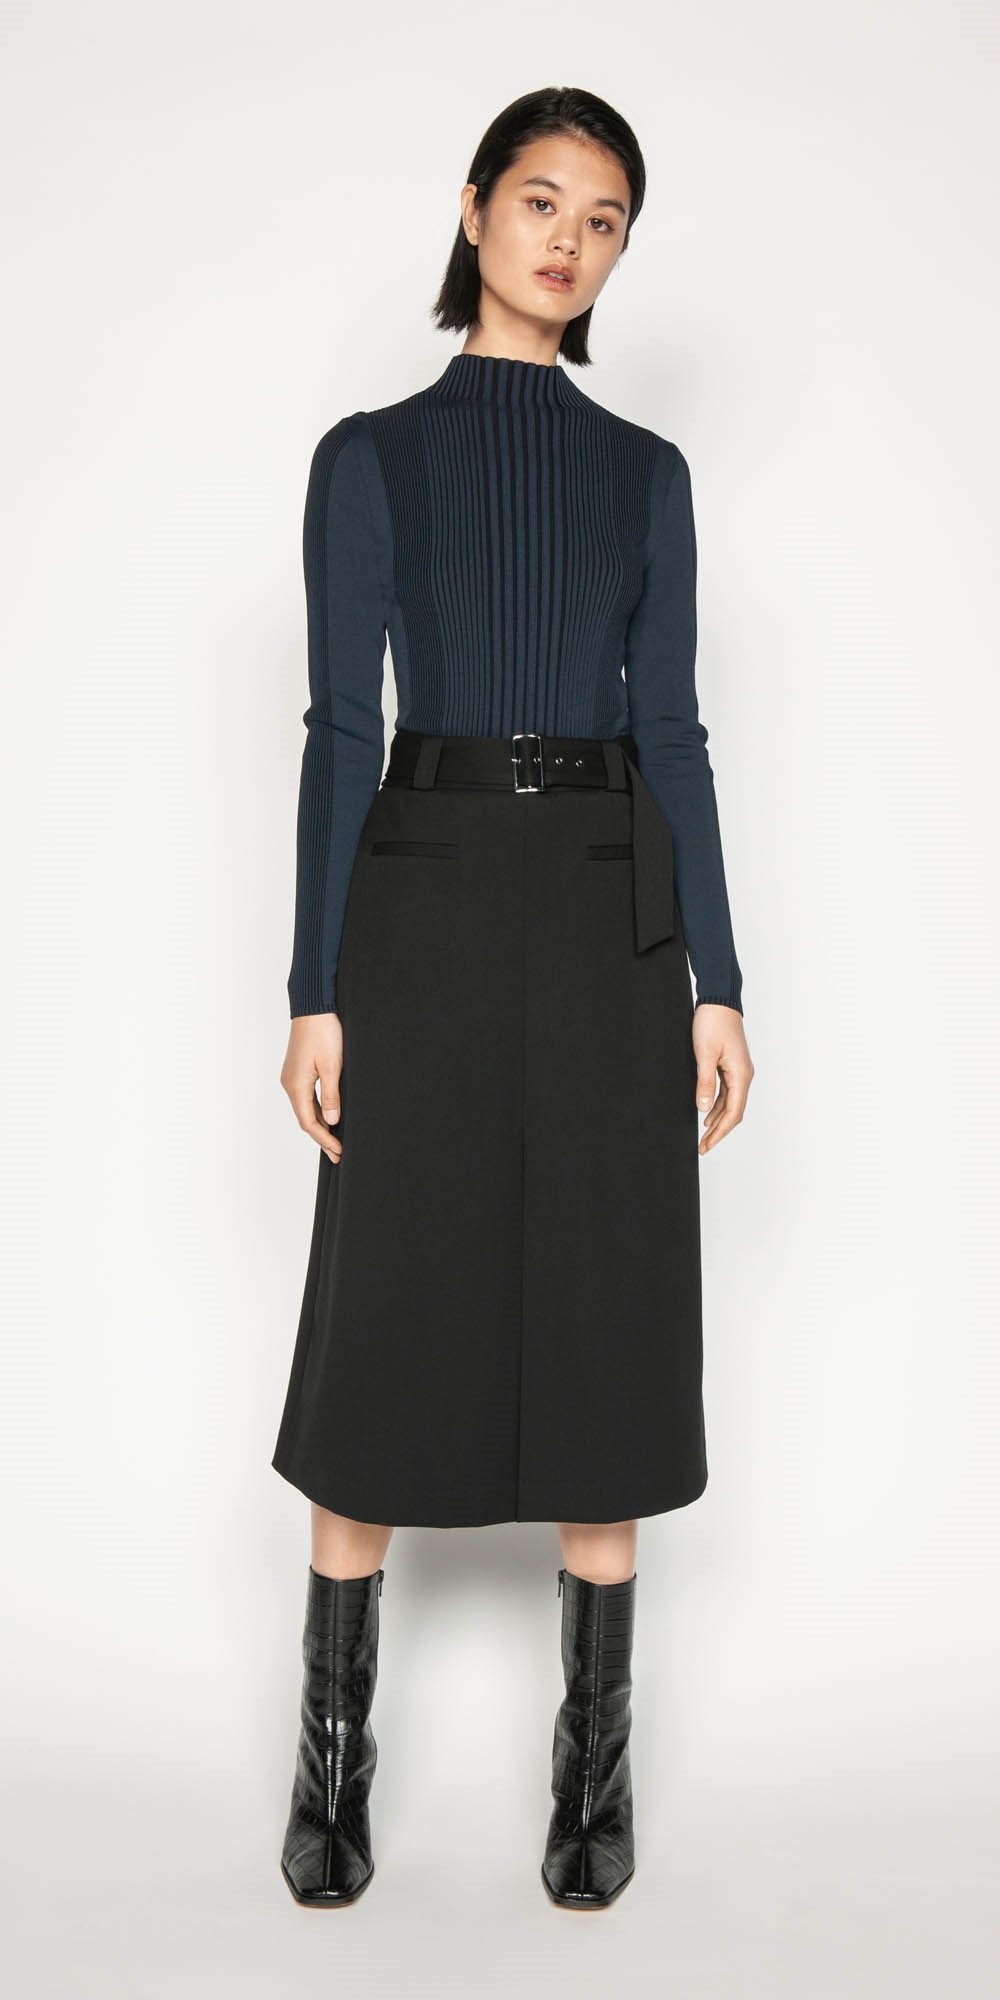 Belted Twill Midi Skirt | Buy Skirts Online - Cue